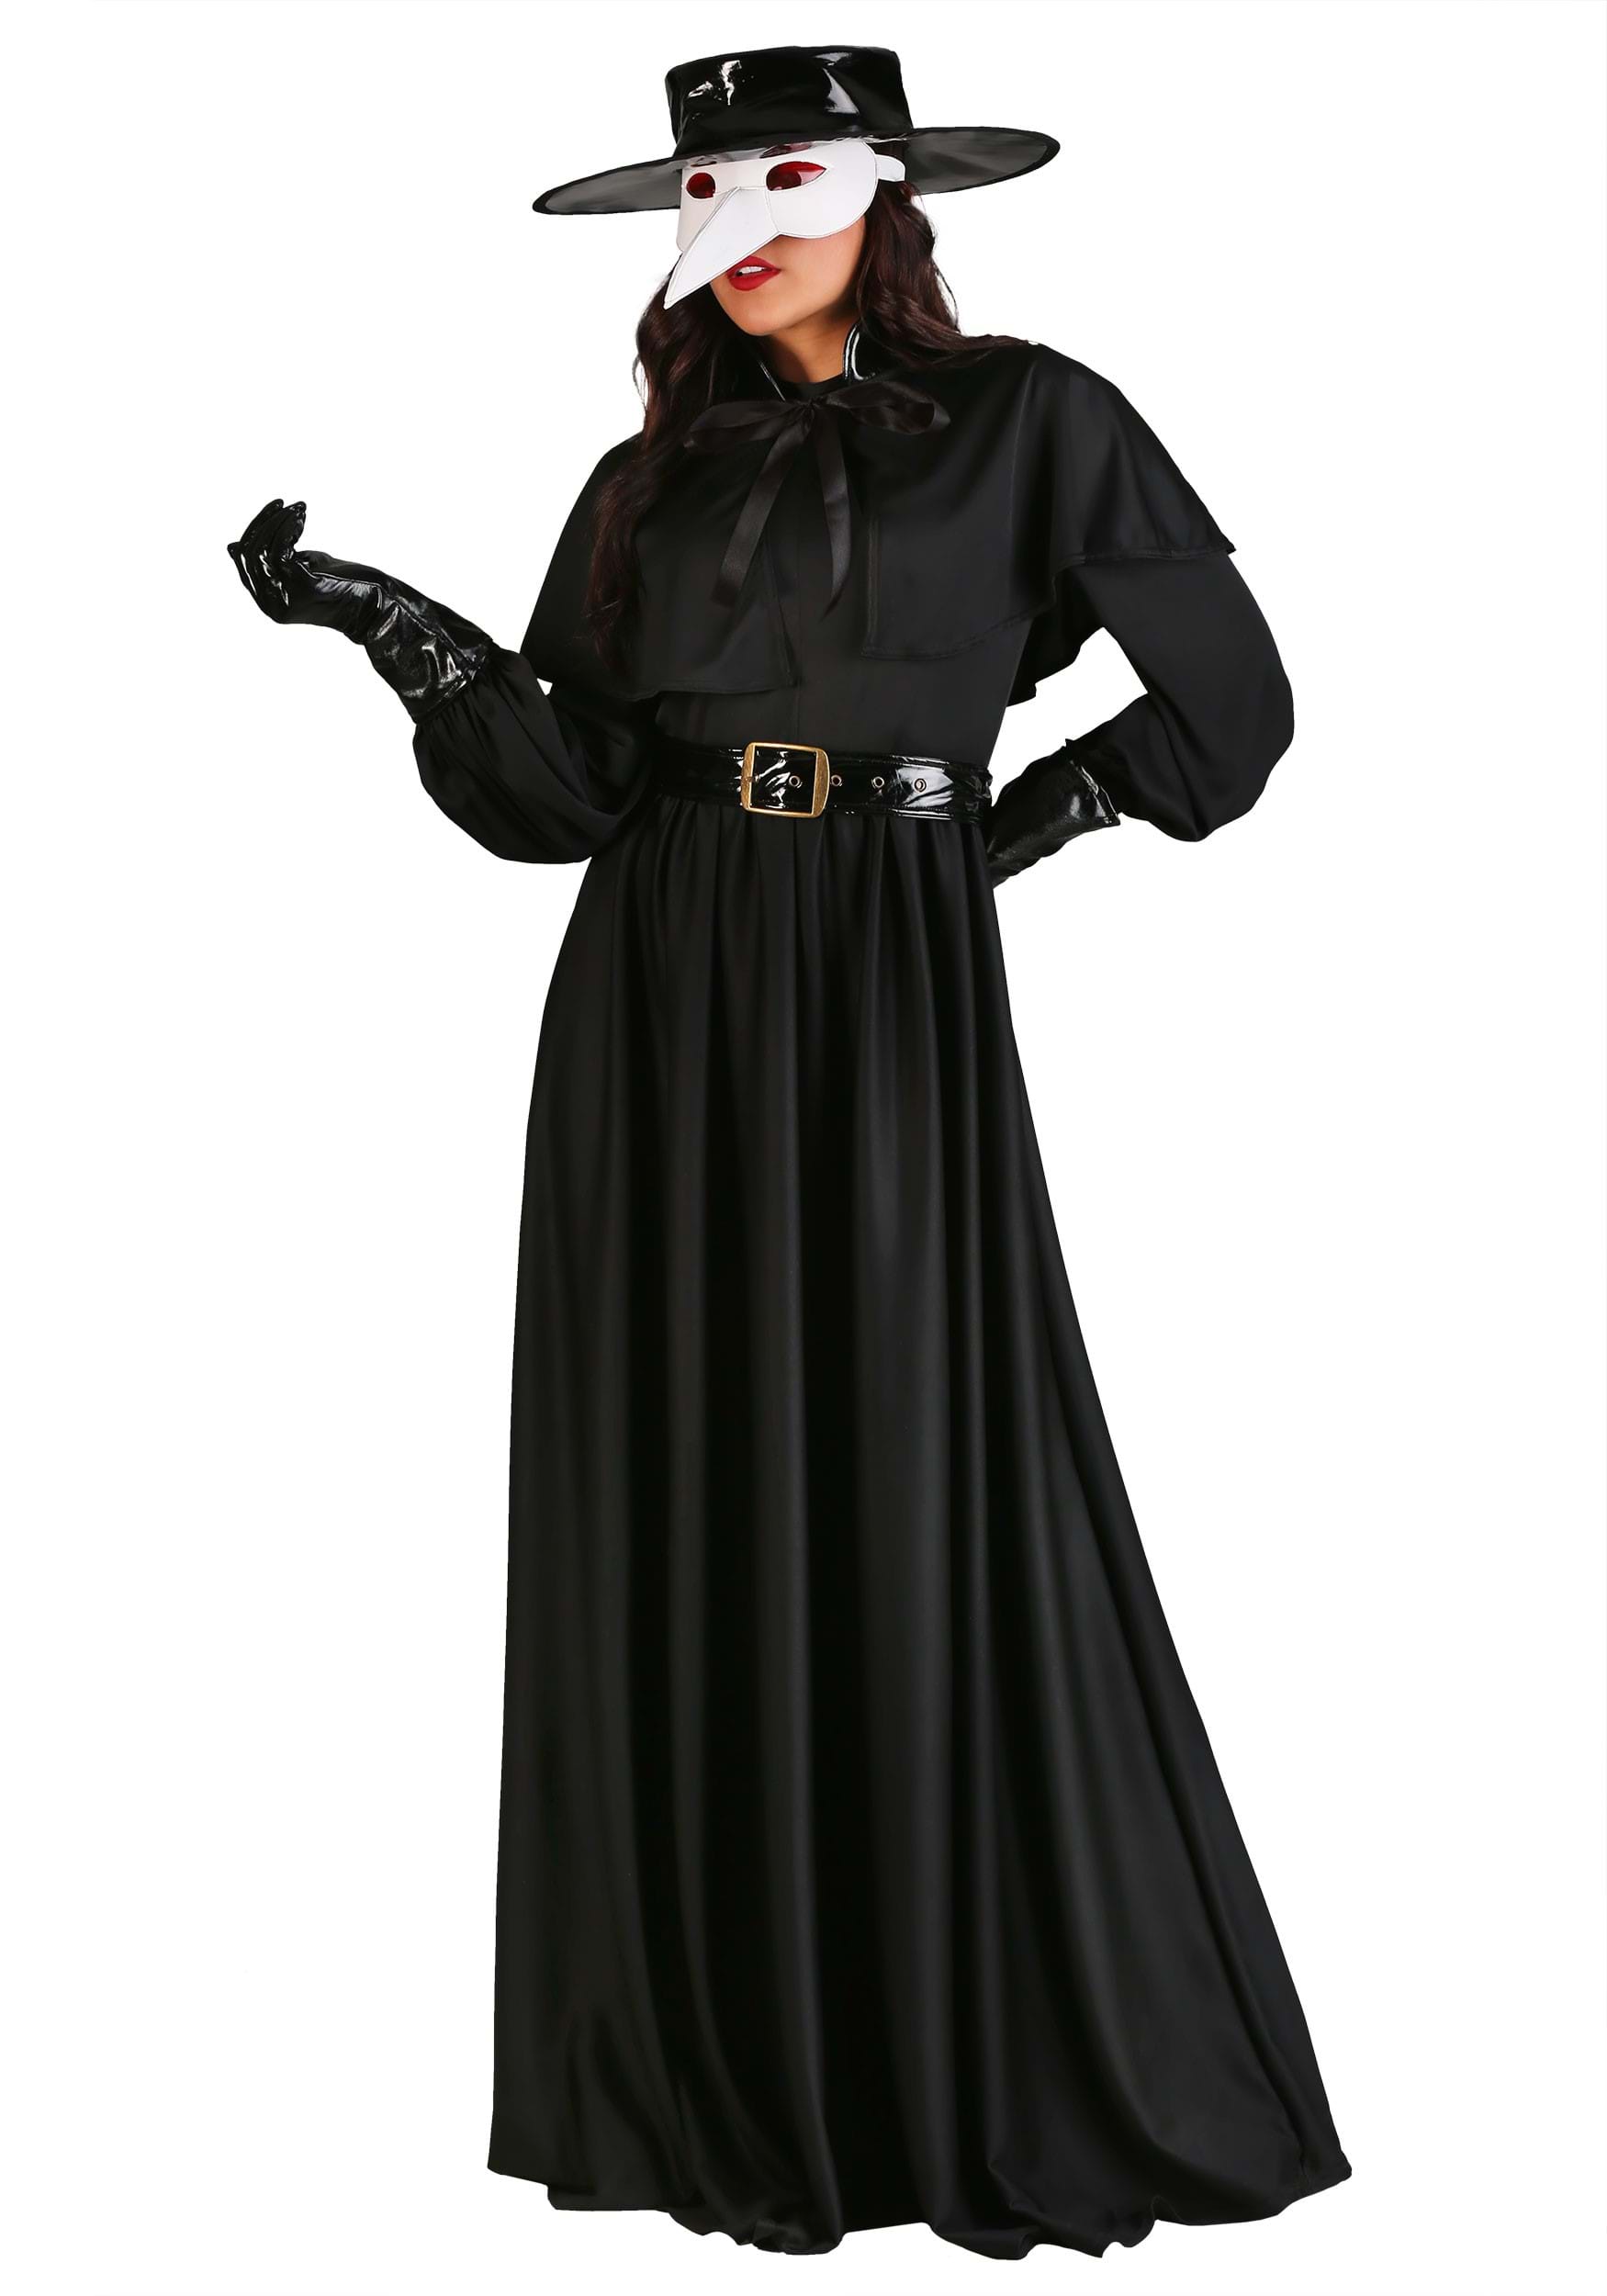 Plague Doctor Costume for Women